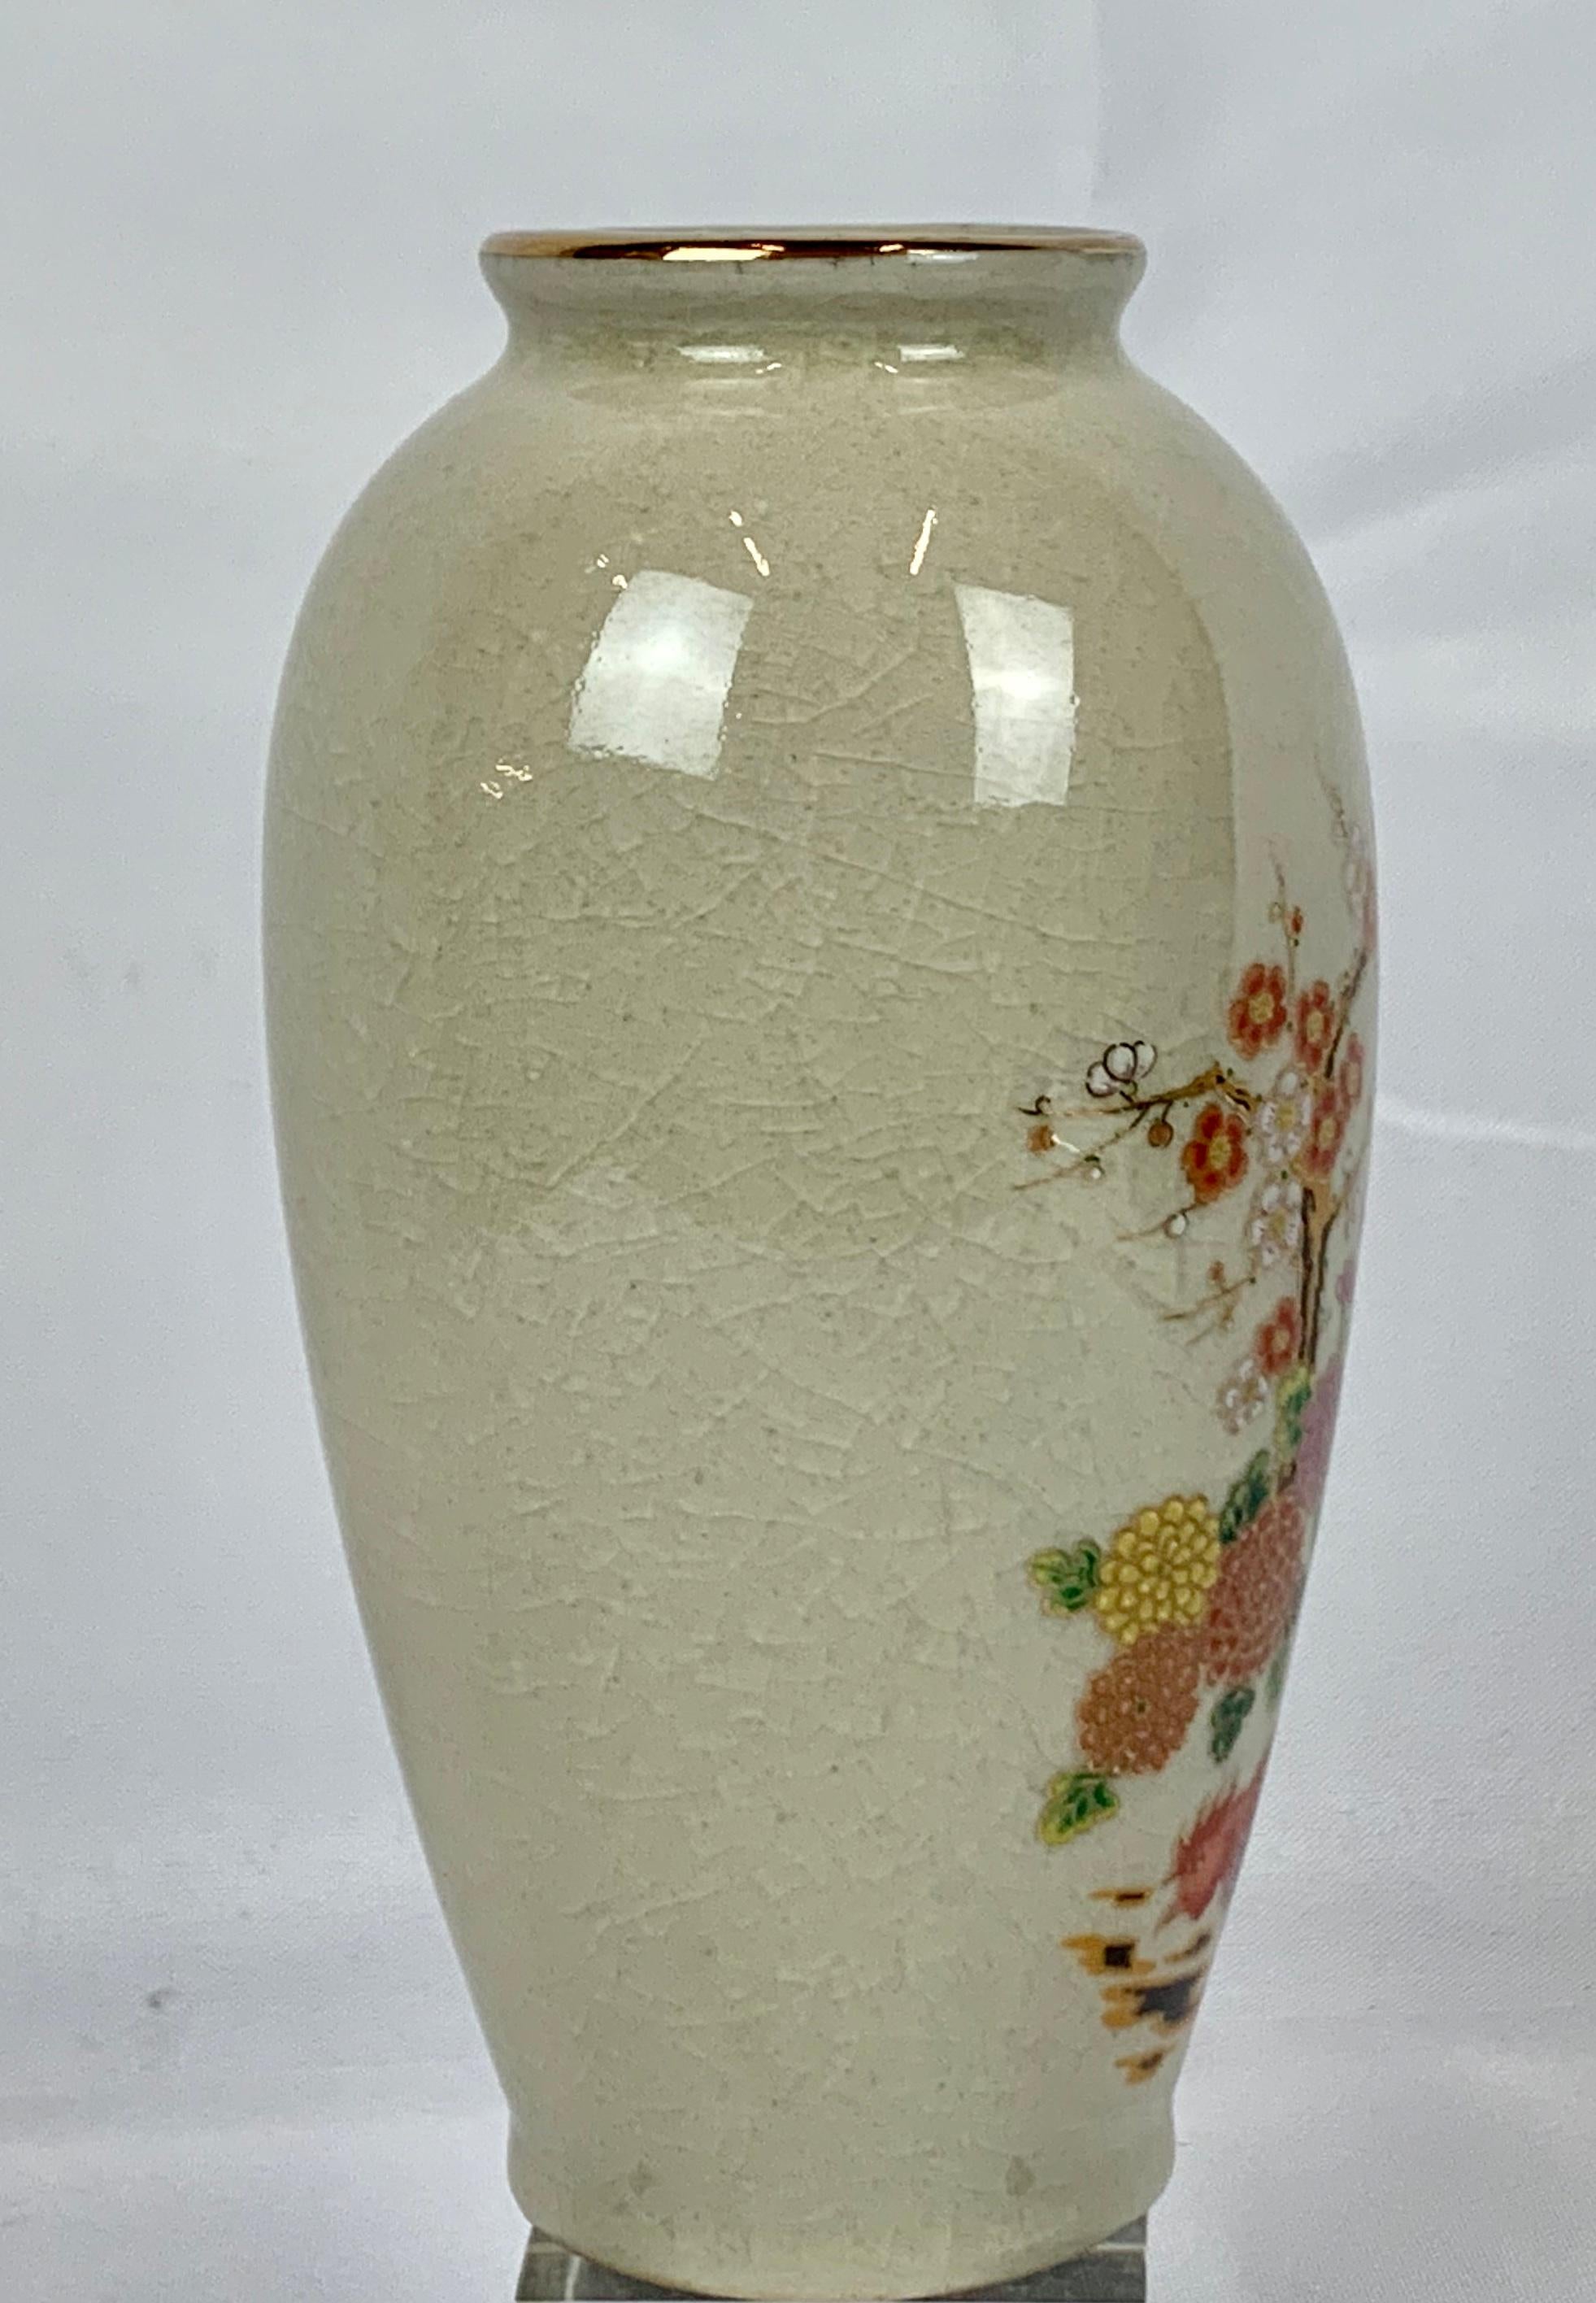 Enameled Vase with Delicate Hand Painted Floral Spray on Neutral Ground-Japan, early 20th For Sale